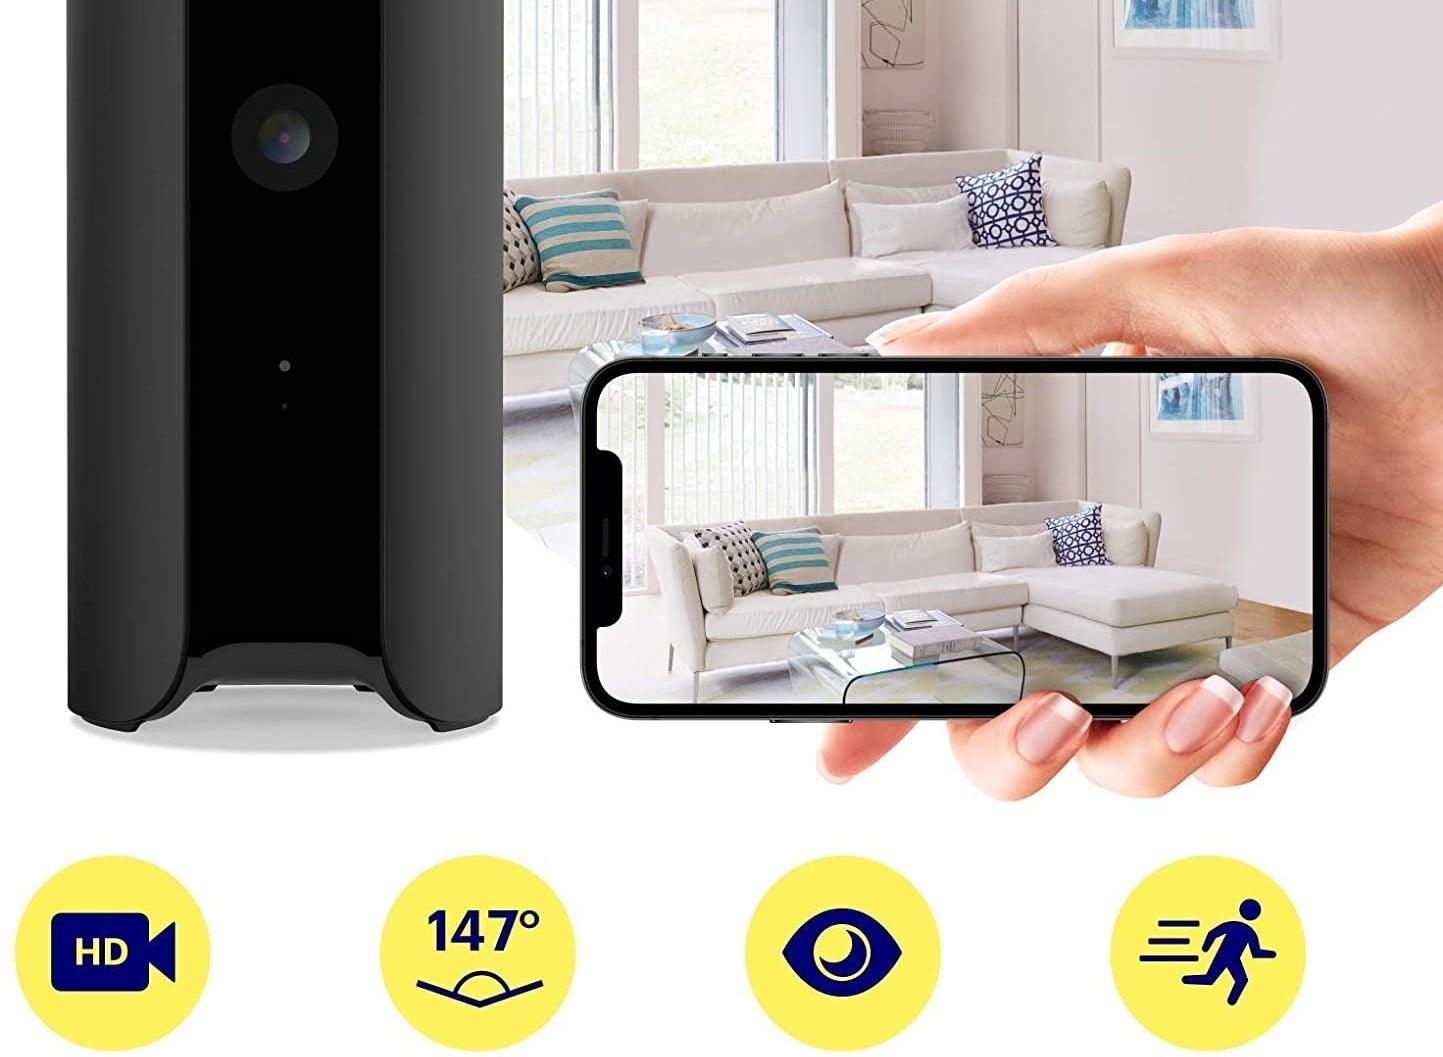 These smart home gadgets are super useful for your household